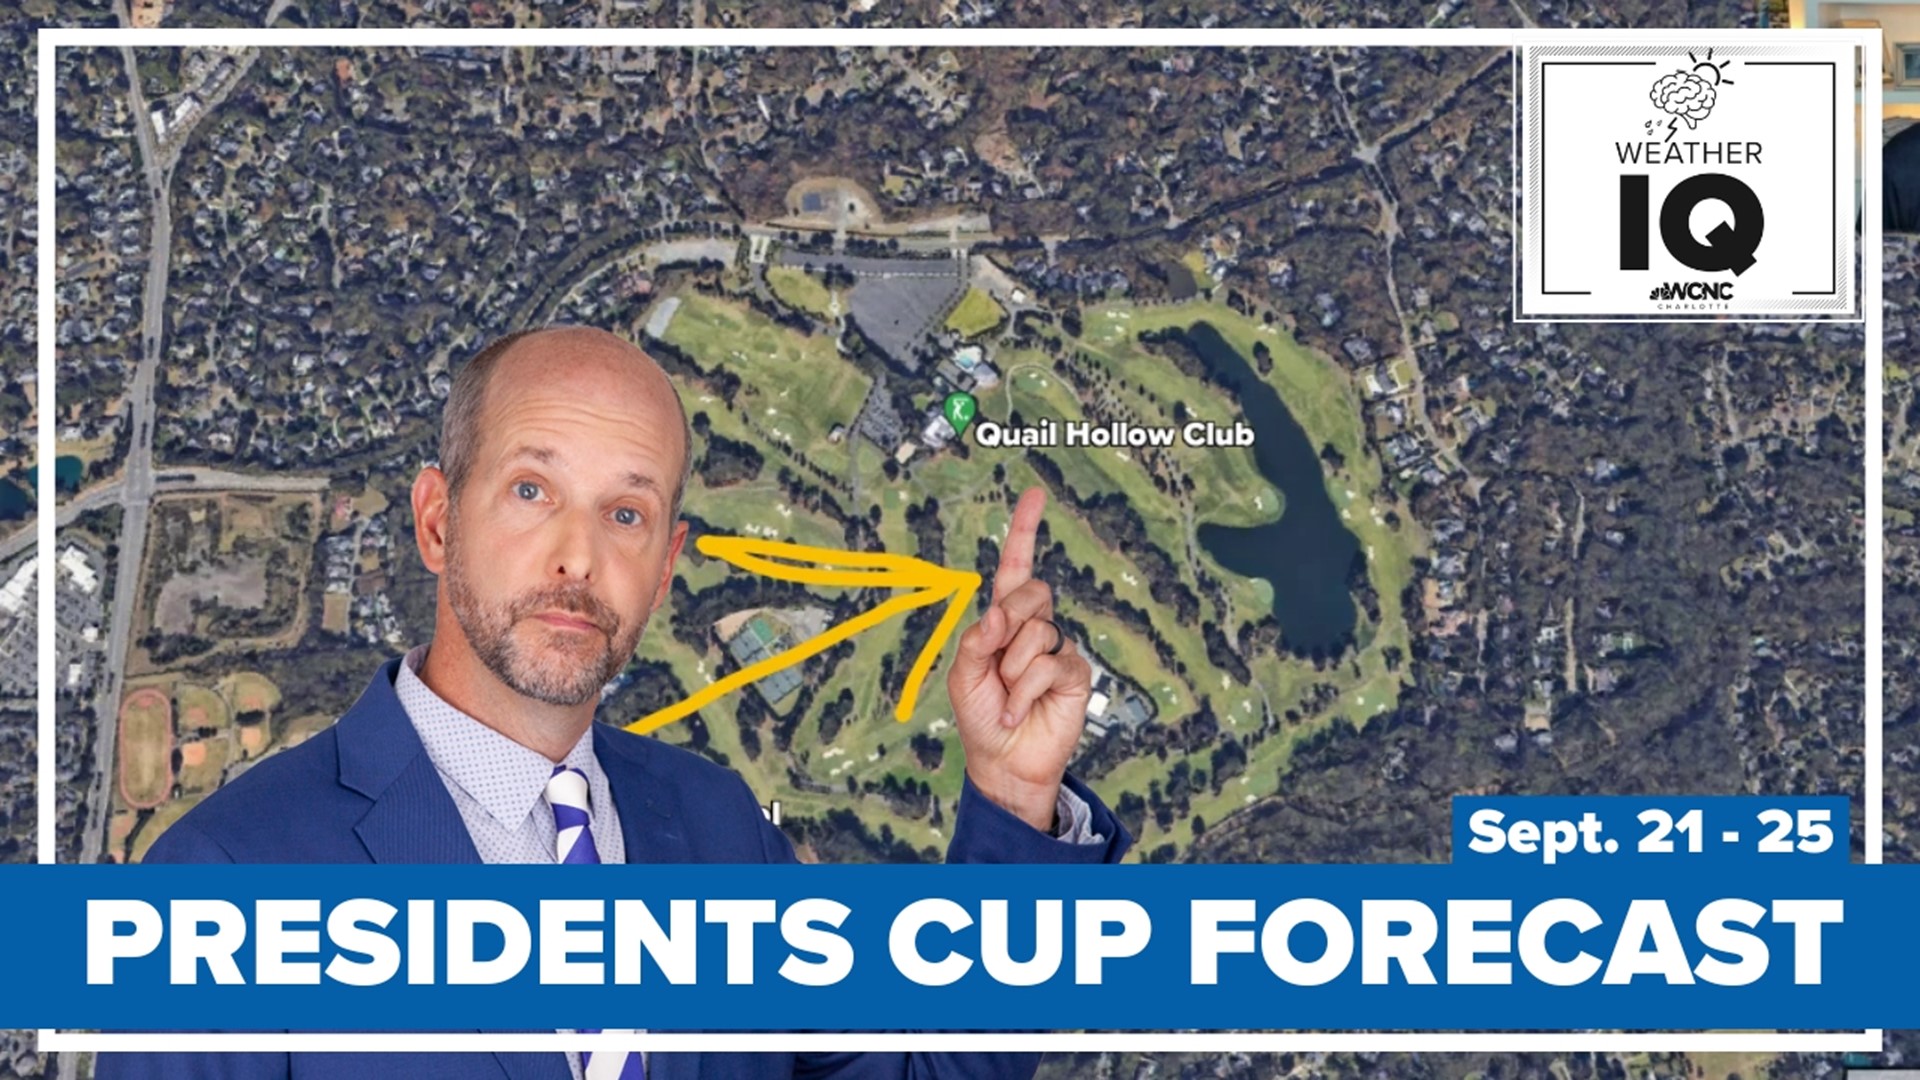 The weather for the Presidents Cup golf tournament in Charlotte will be hot and dry, chief meteorologist Brad Panovich forecasts.